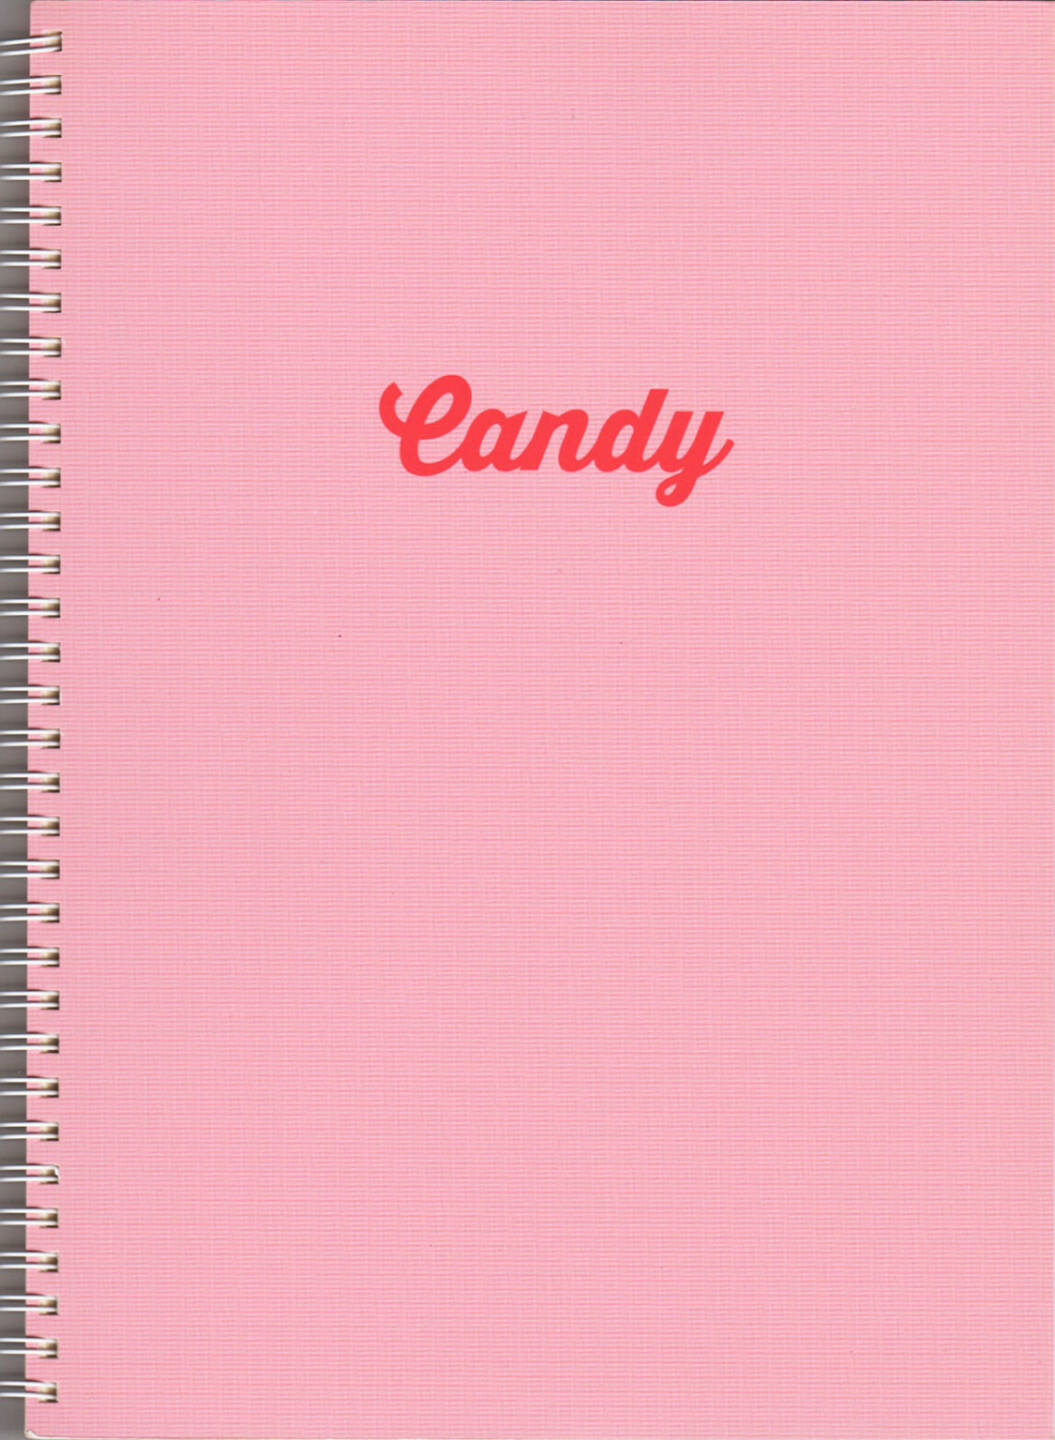 Aaron McElroy - Candy, Self published 2015, Cover - http://josefchladek.com/book/aaron_mcelroy_-_candy